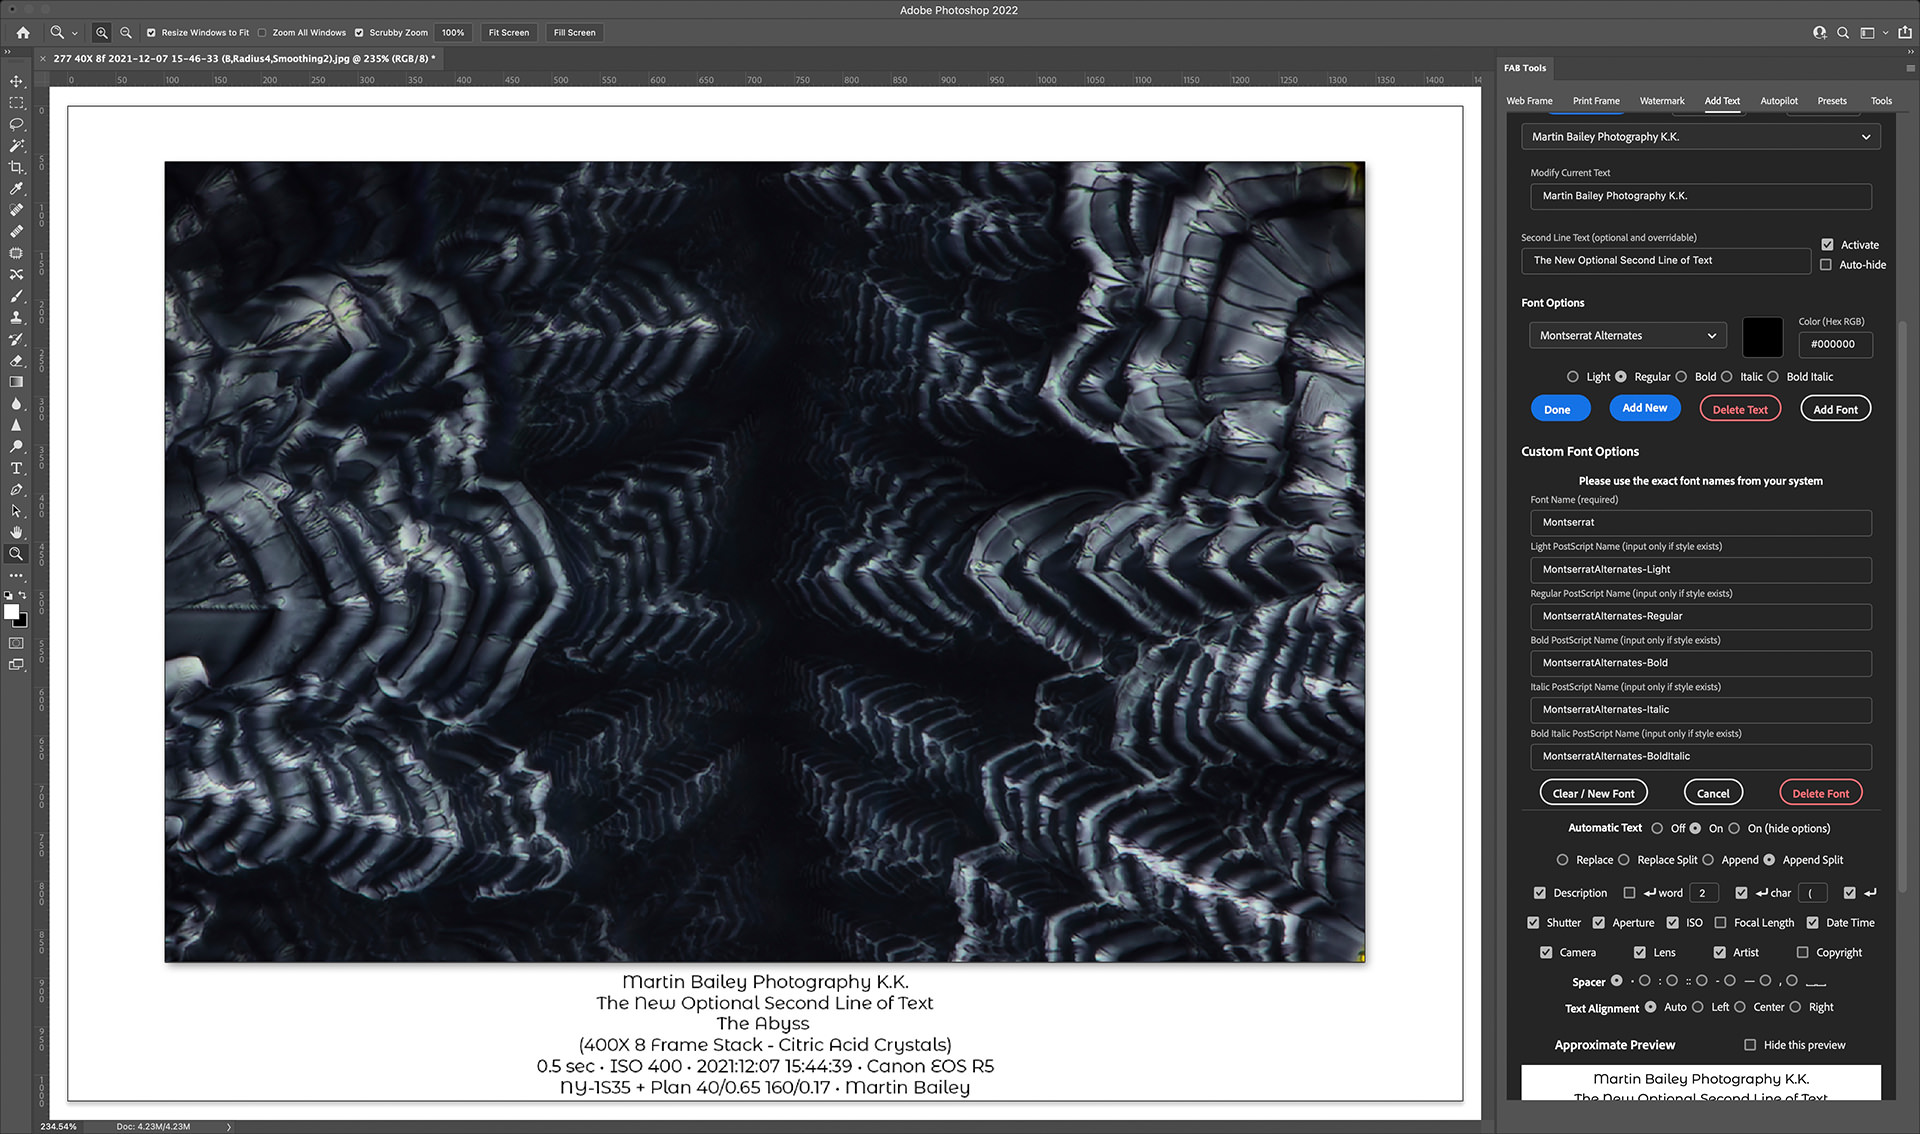 New Text Watermark Features in MBP FAB Tools for Adobe Photoshop (Podcast 763)